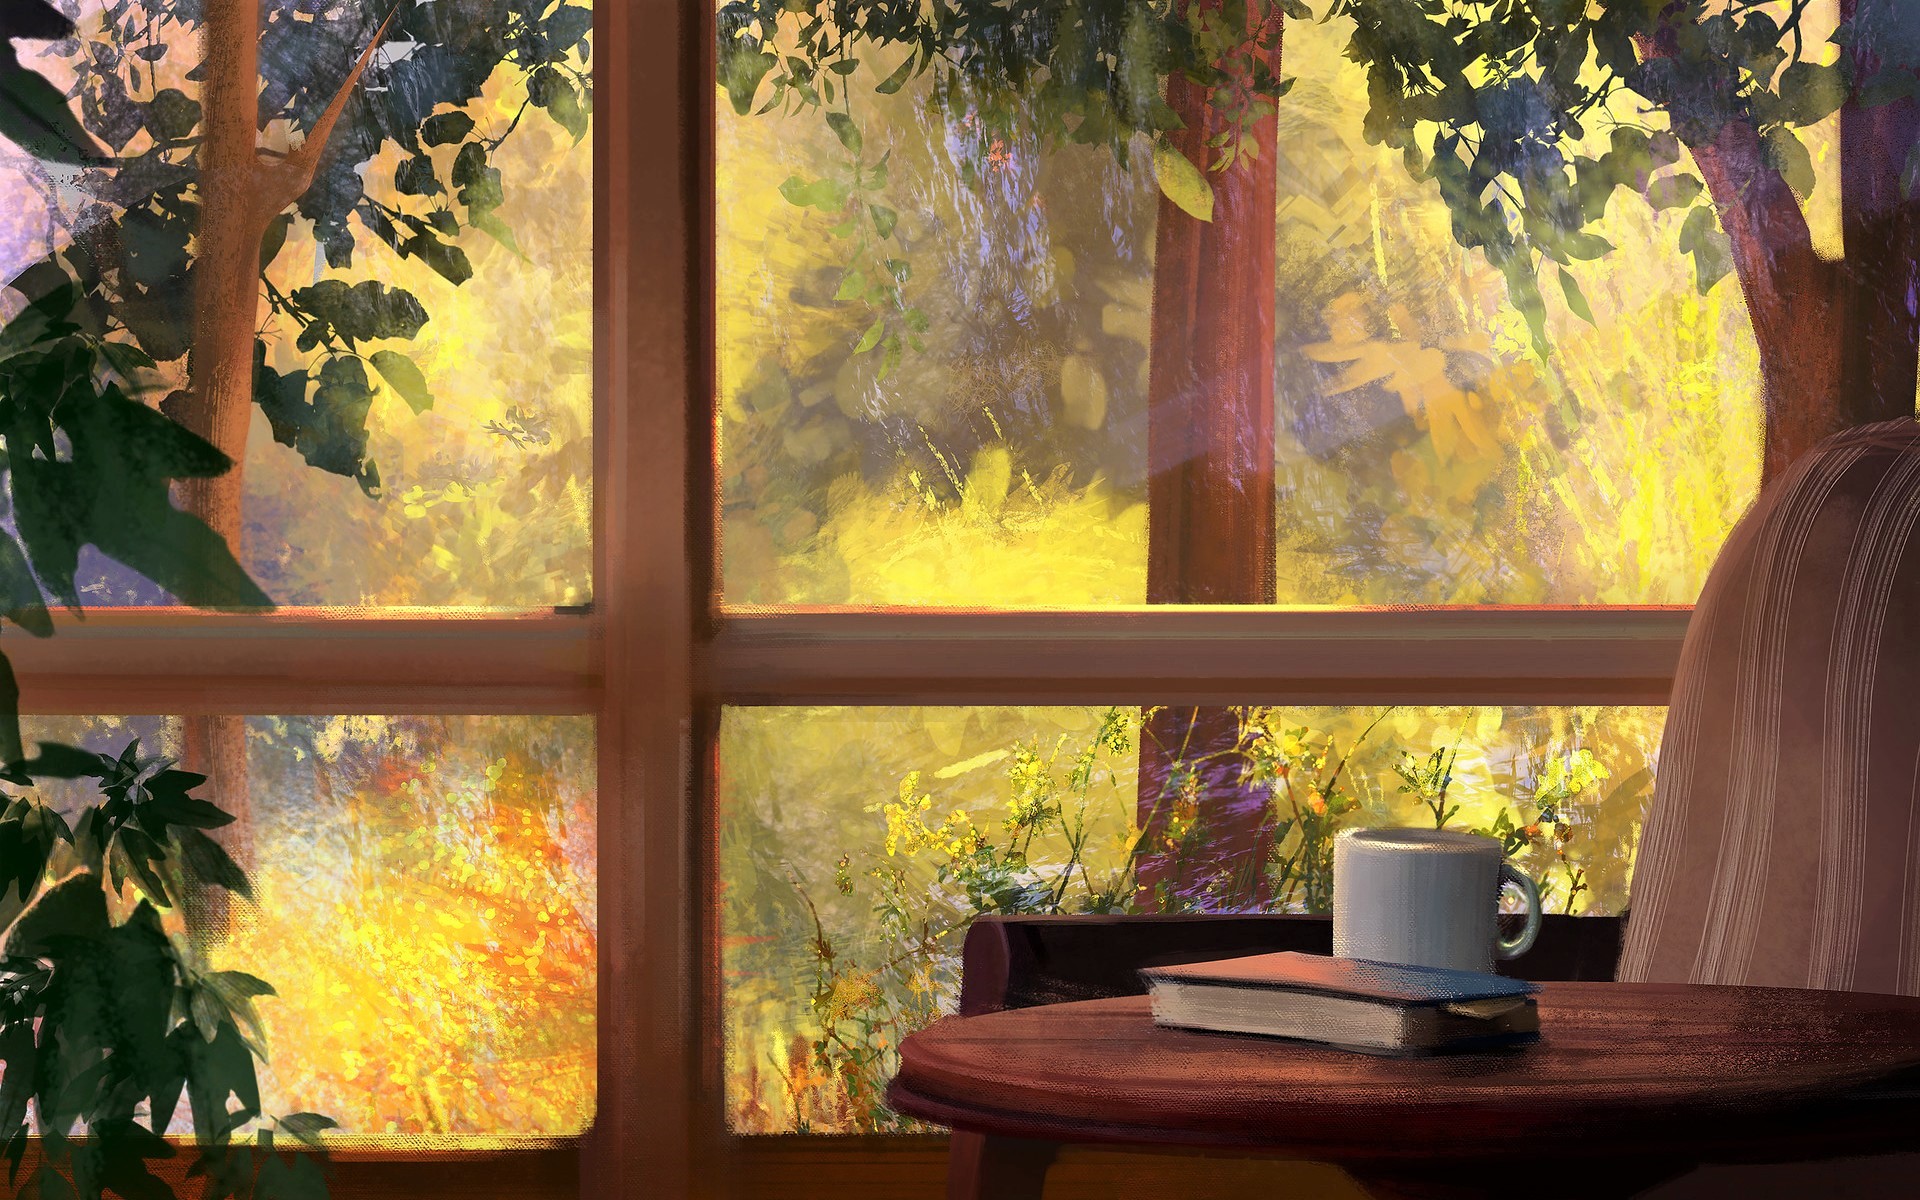 window, artistic, painting, book, table